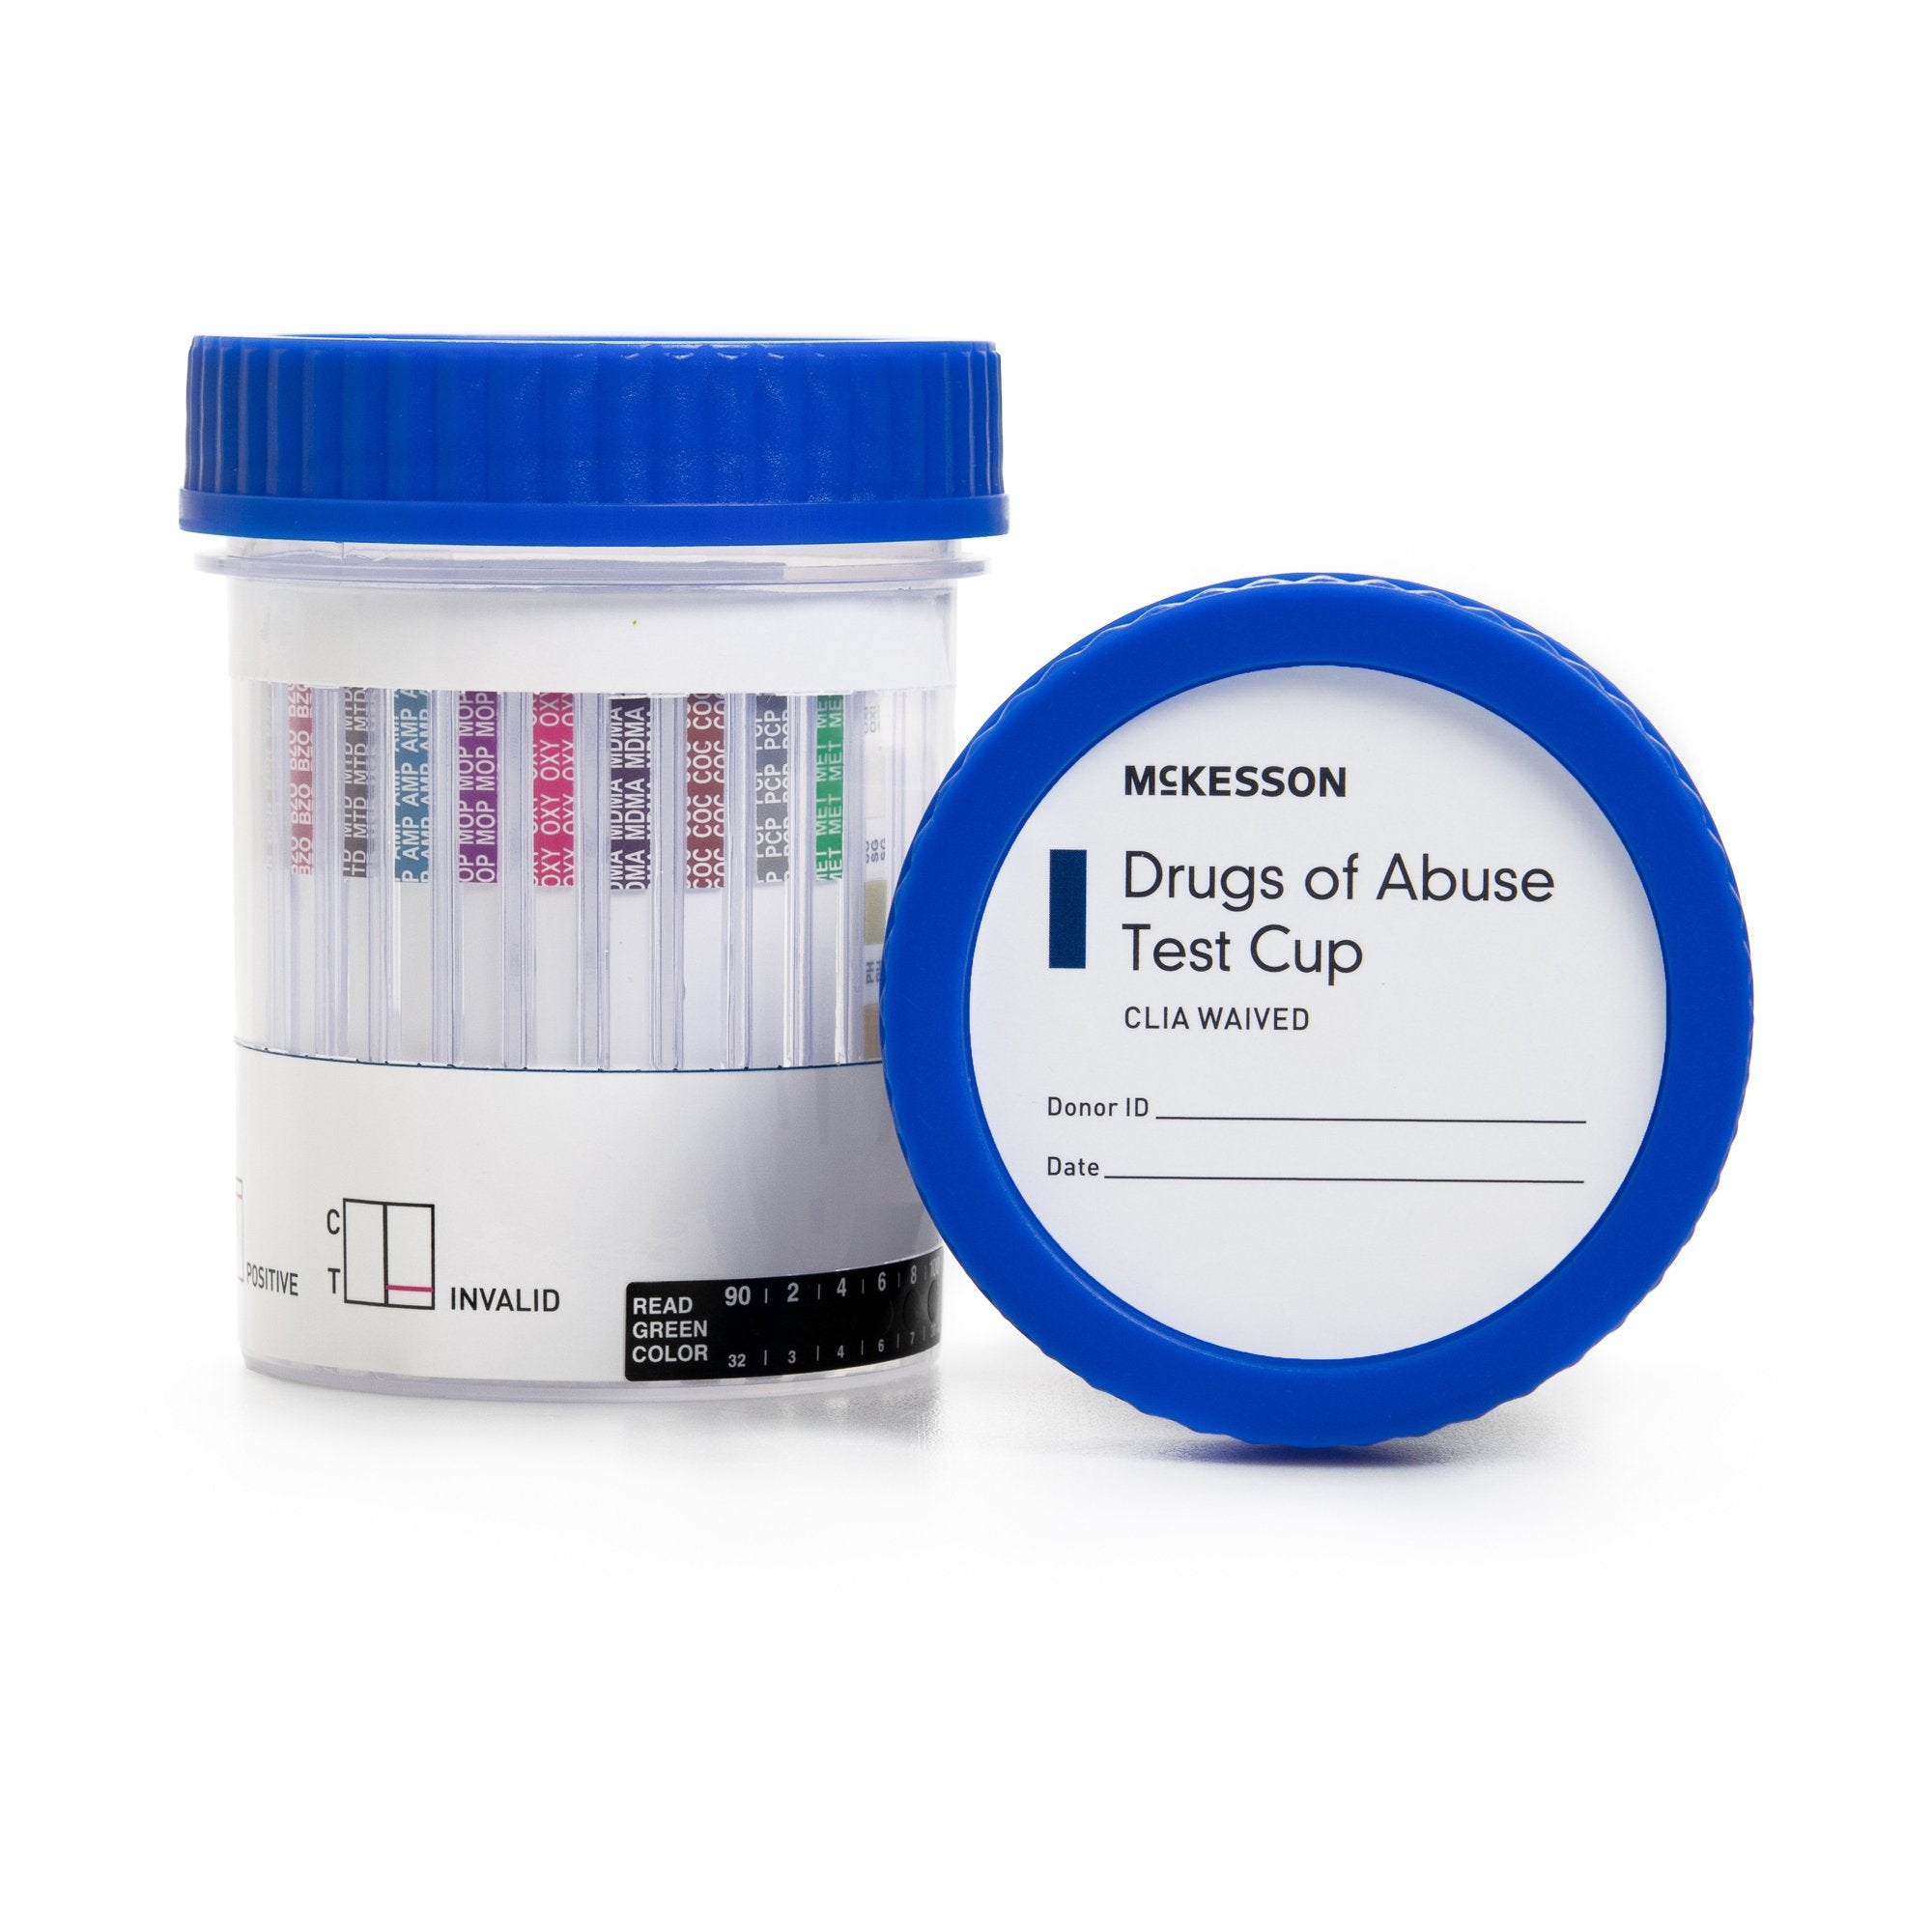 Drugs of Abuse Test Kit McKesson 14-Drug Panel with Adulterants AMP, BAR, BUP, BZO, COC, mAMP/MET, MDMA, MOP300, MTD, OXY, PCP, PPX, TCA, THC (OX, pH, SG) Urine Sample 25 Tests CLIA Waived